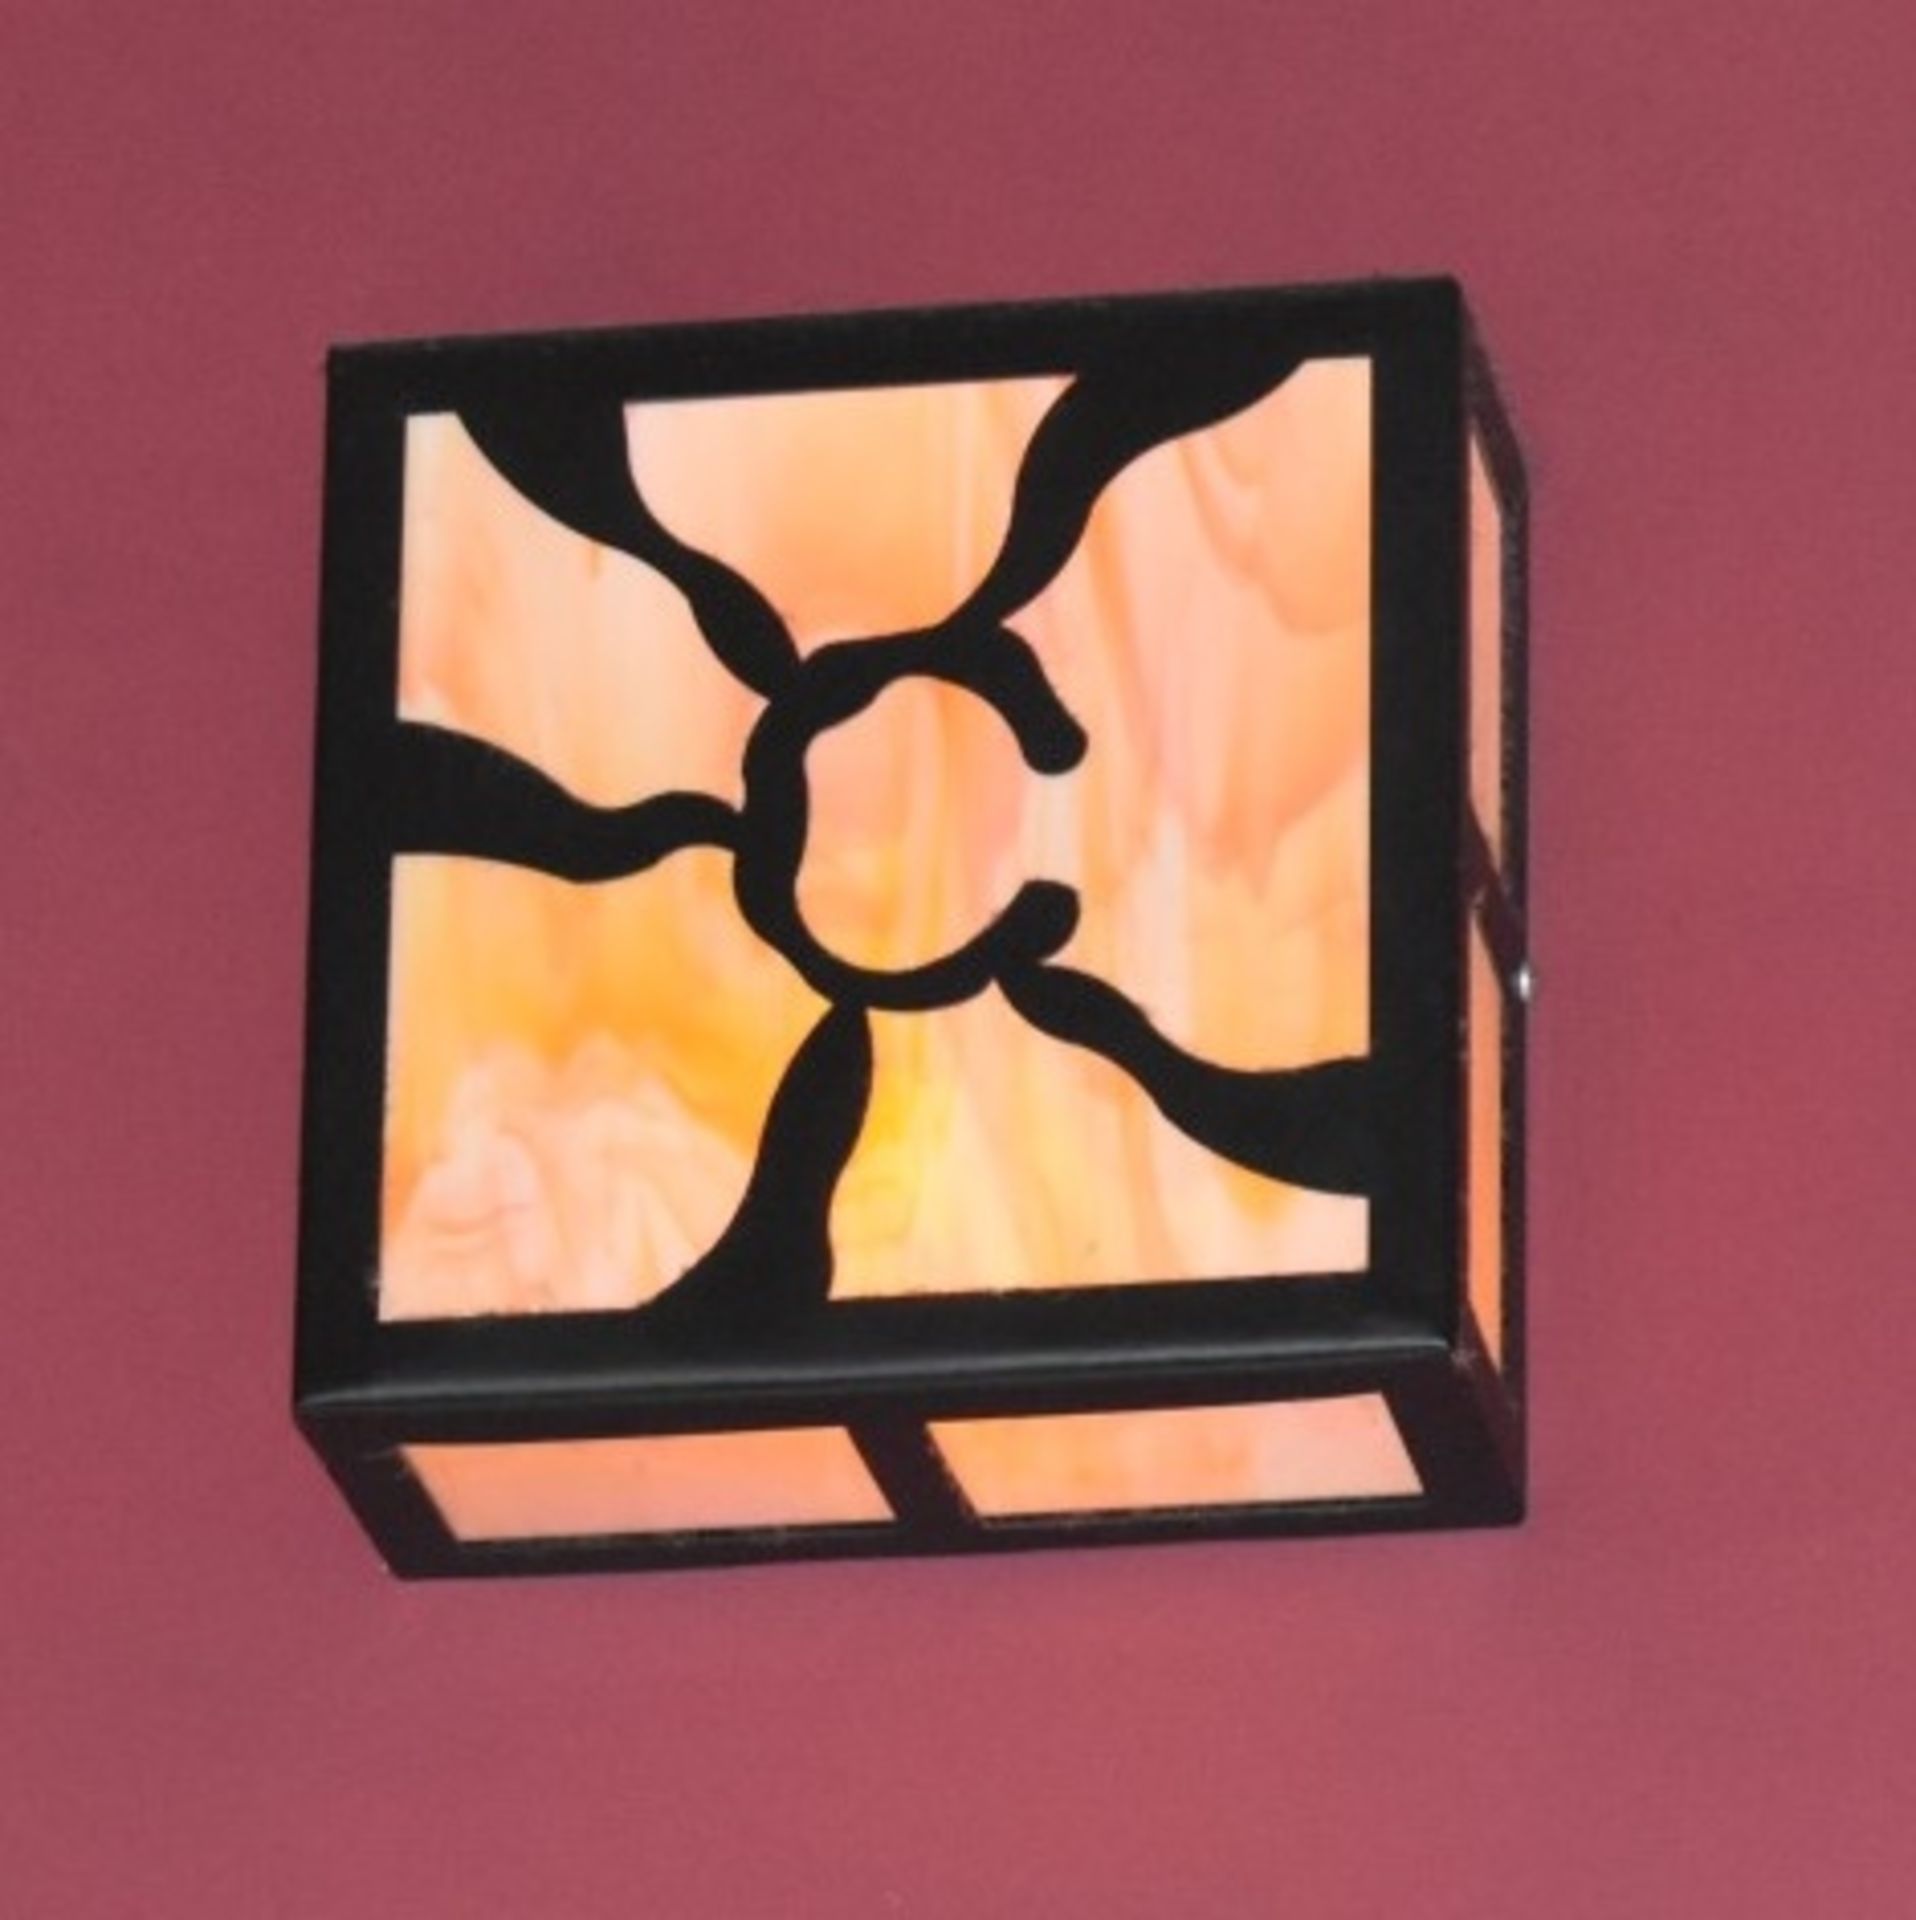 7 x Contemporary Wall / Ceiling Light Fittings - CL423 GF - From a Popular Mexican Themed Restaurant - Image 2 of 5